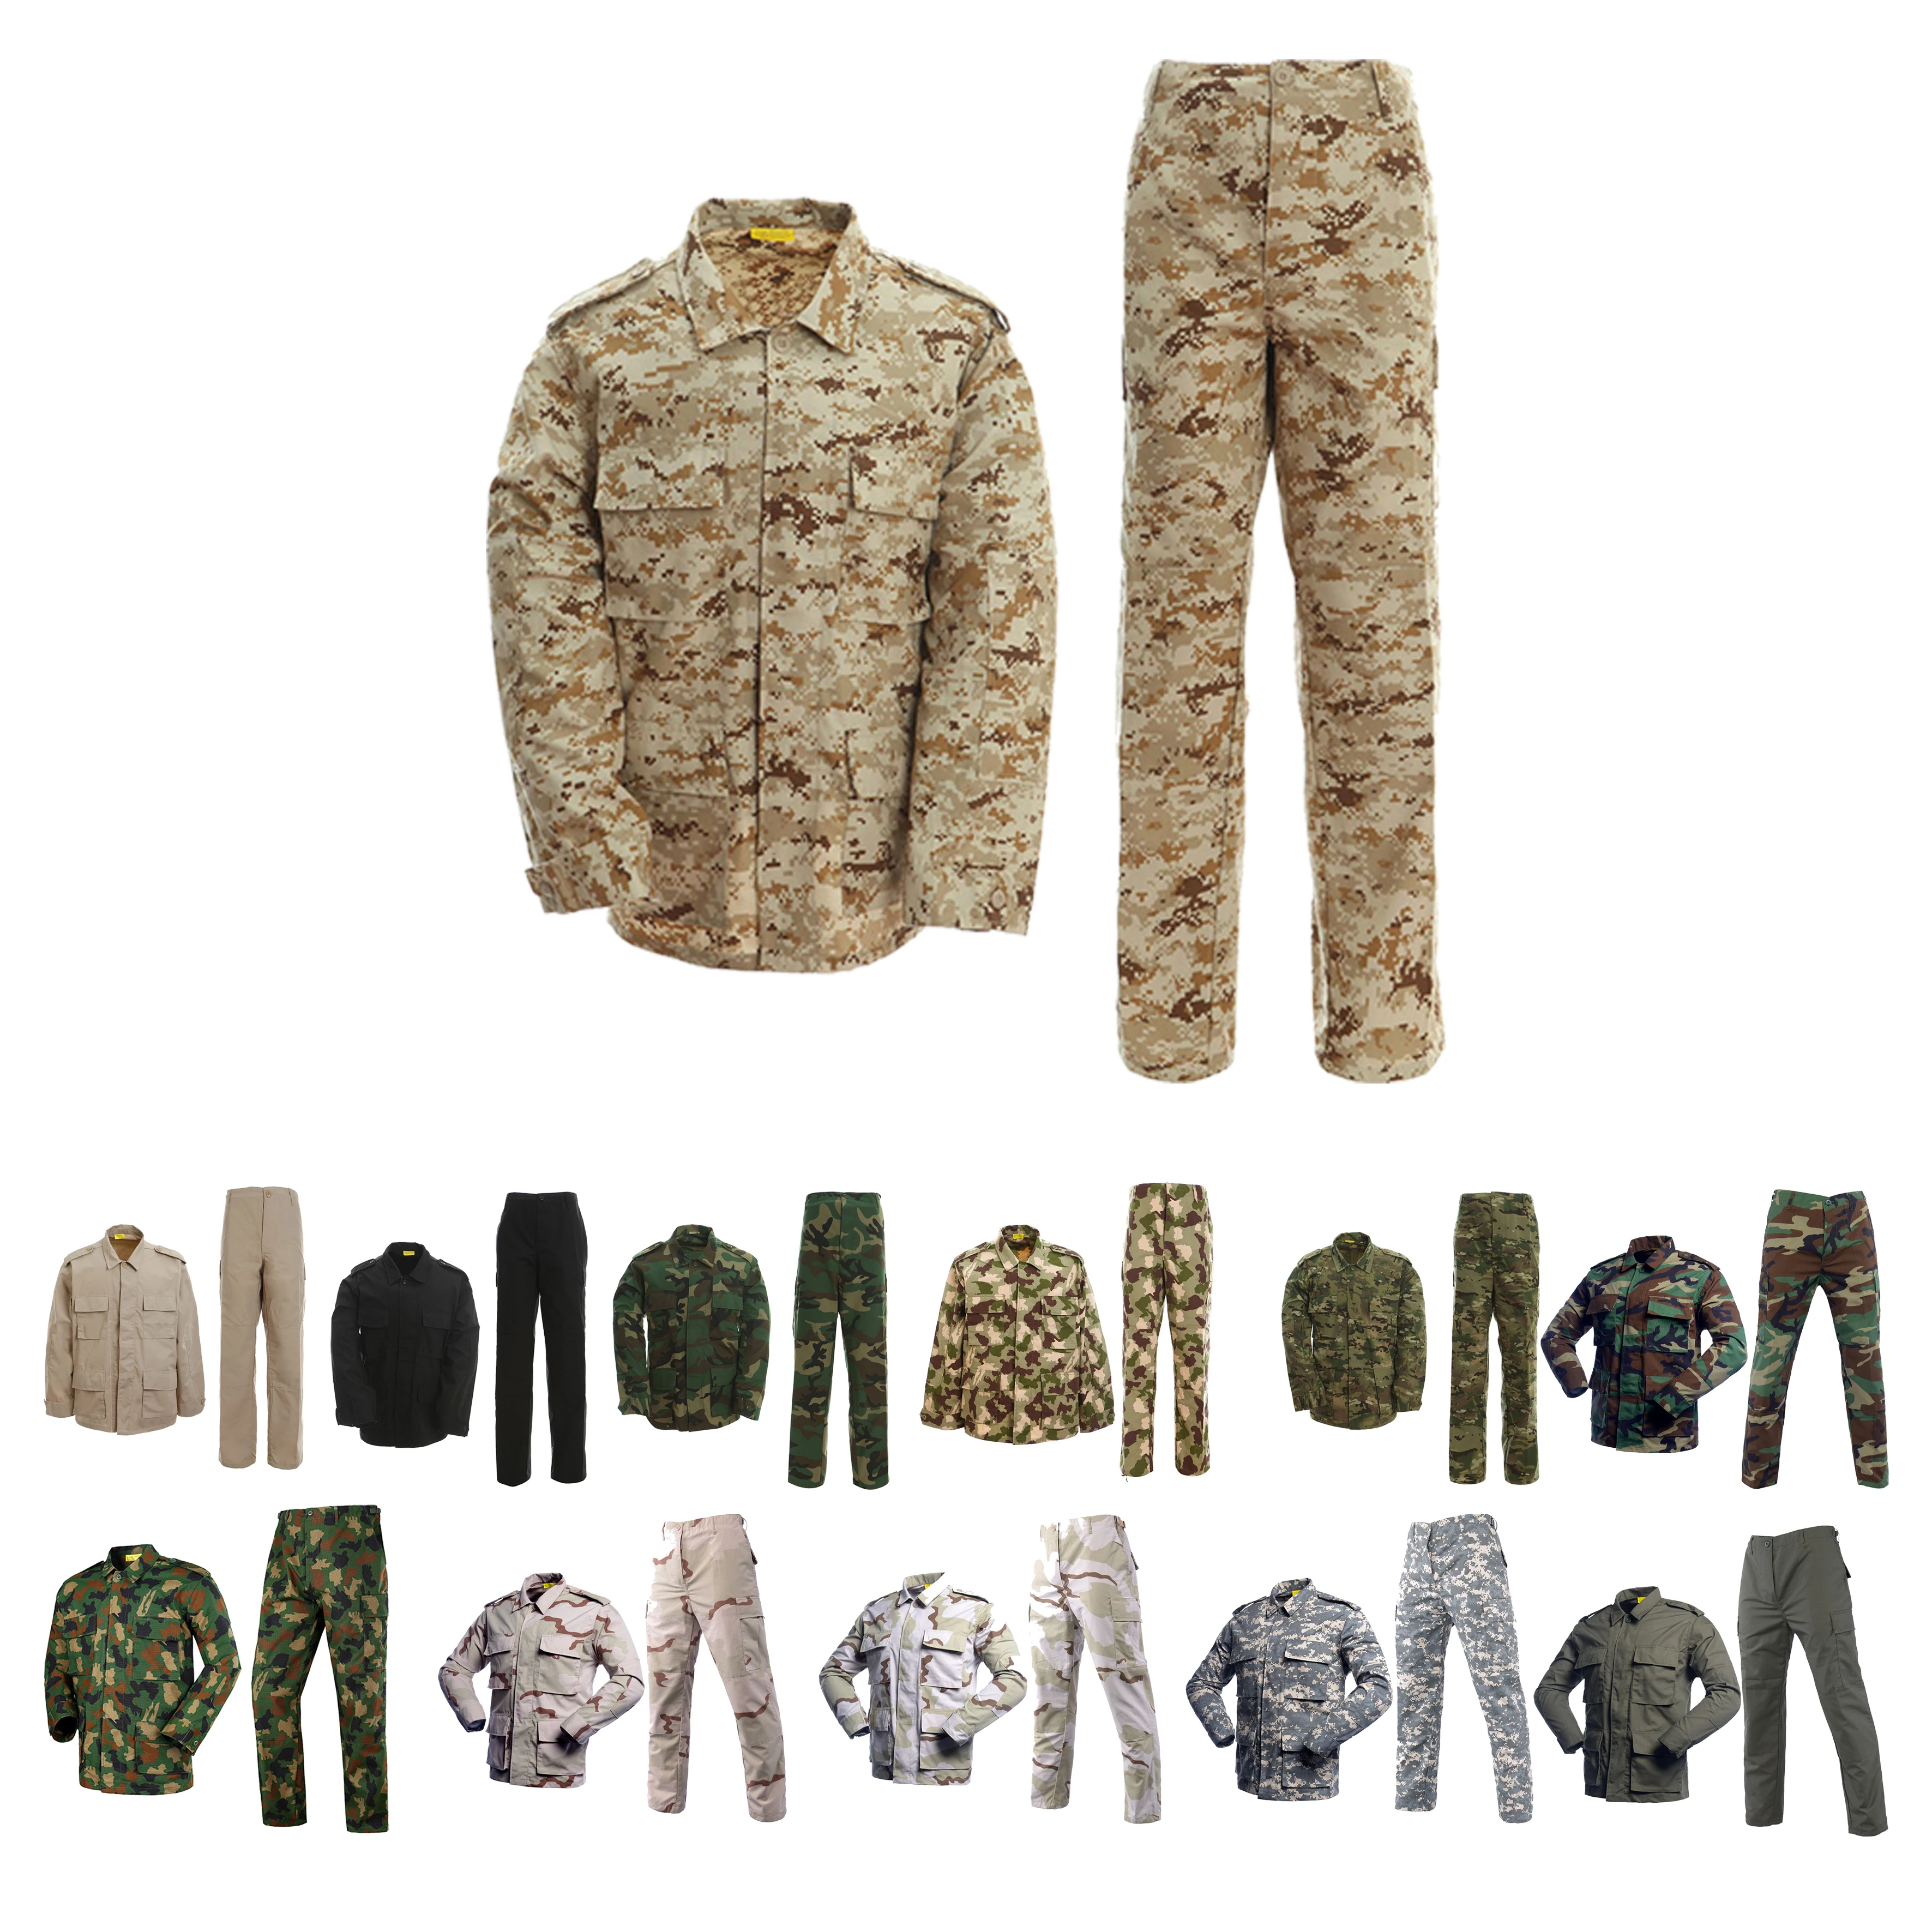 

New arrive Outdoor Military ACU Woodland Camouflage Ripstop Army Combat Uniforms for men, 12 colors